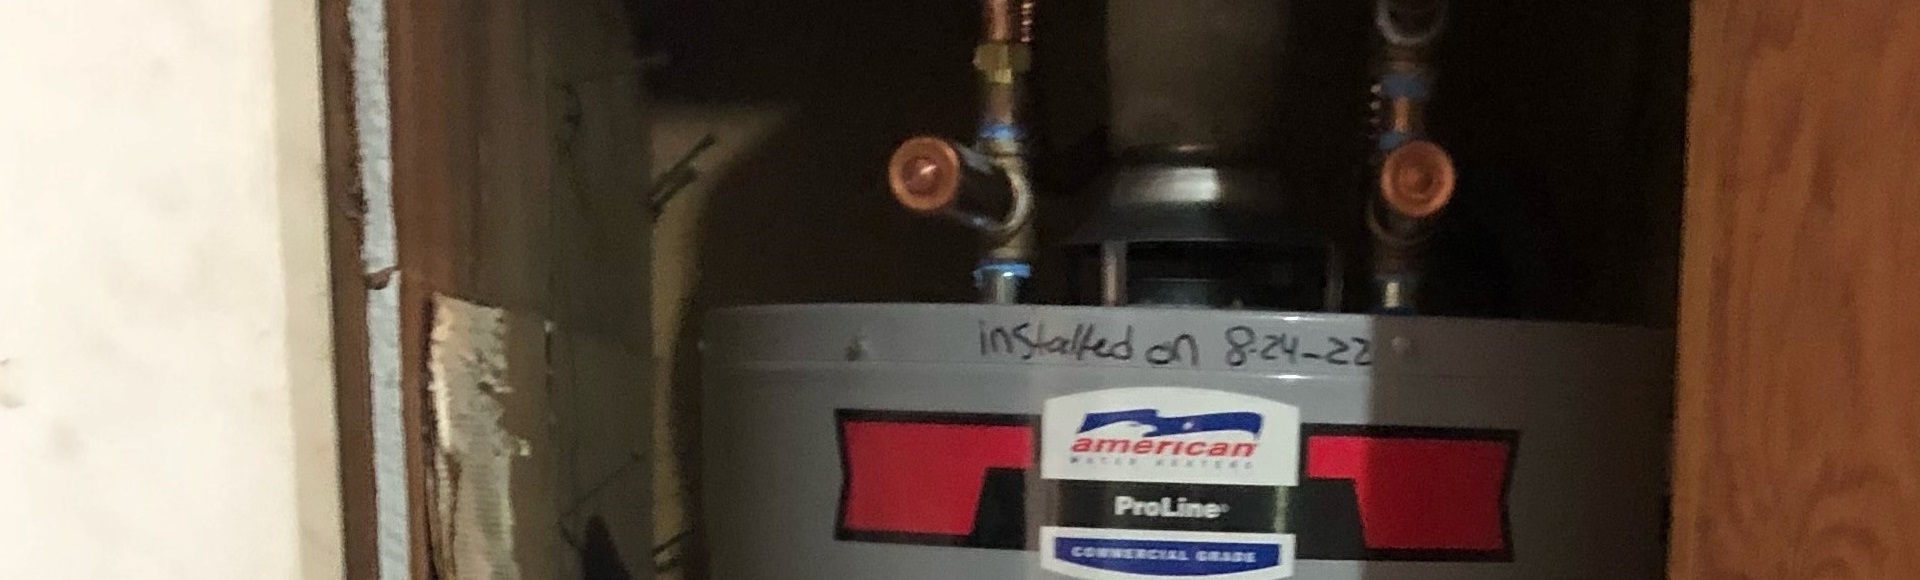 Water Heater Replaced by HomeServe Cares for Okmulgee Woman